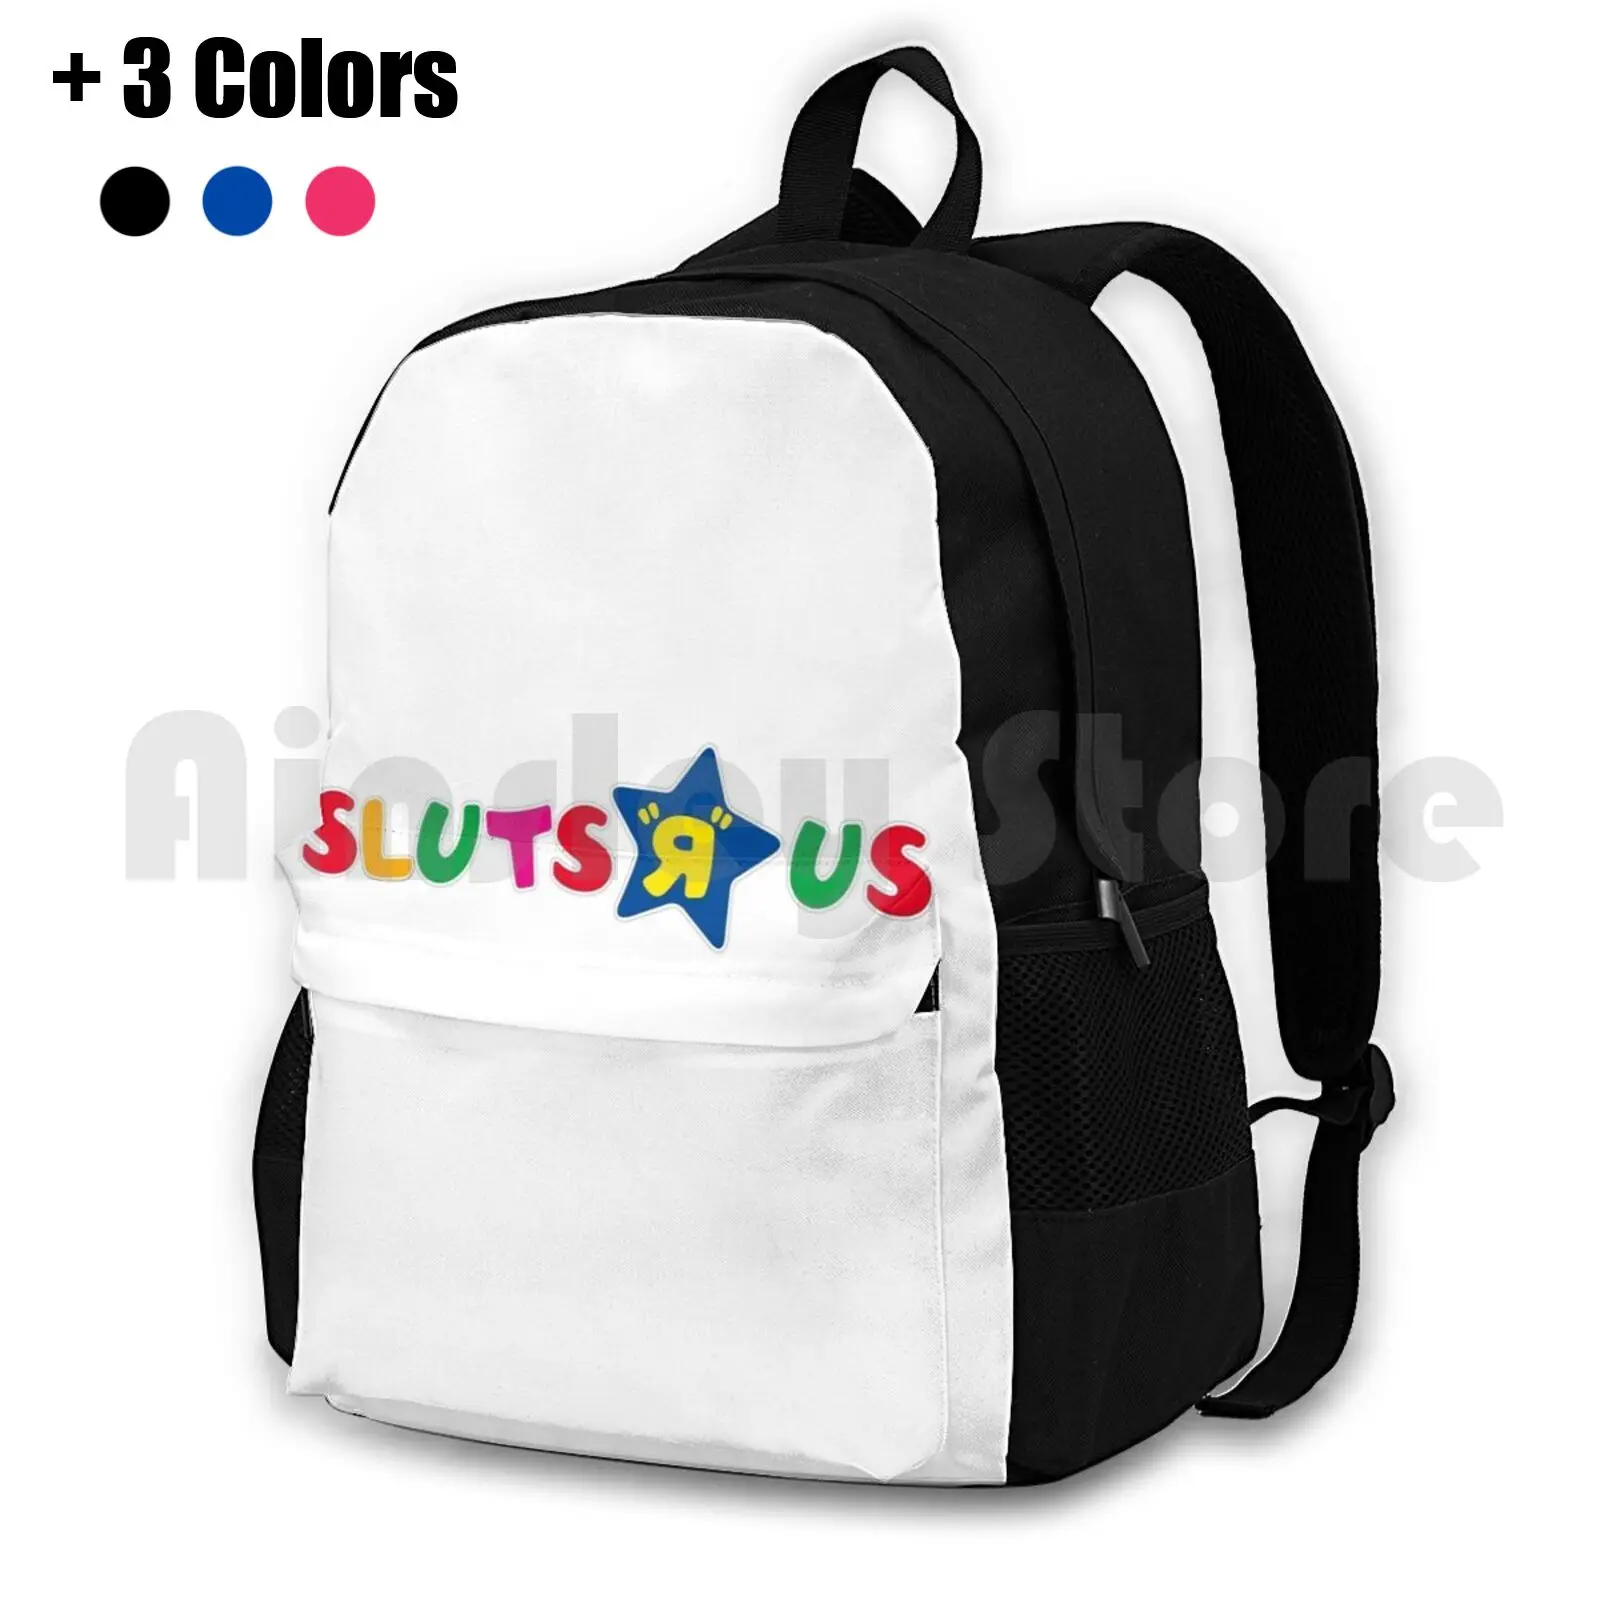 

Toys R Us Funny Outdoor Hiking Backpack Riding Climbing Sports Bag Toys R Us Toys Champagne Loser We Are The Queen Funny Art